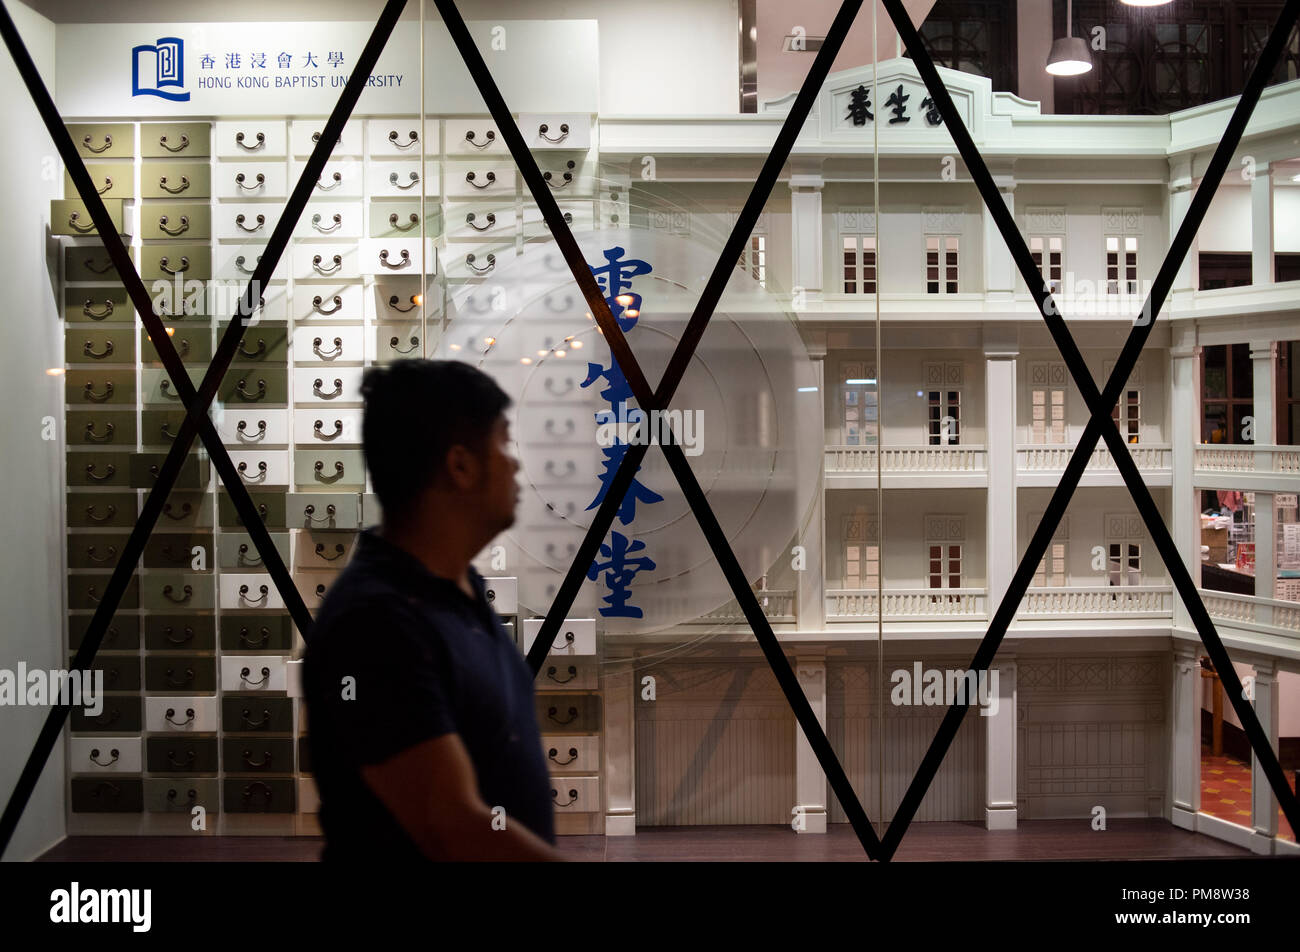 A pedestrian seen passing by Hong Kong Baptist University School of Chinese Medicine Lui Seng Chun with taped windows and doors. Windows and doors of buildings have been taped ahead of Super Typhoon Mangkhut arrival in Hong Kong, China. It is expected to land with a typhoon signal No. 8. Stock Photo